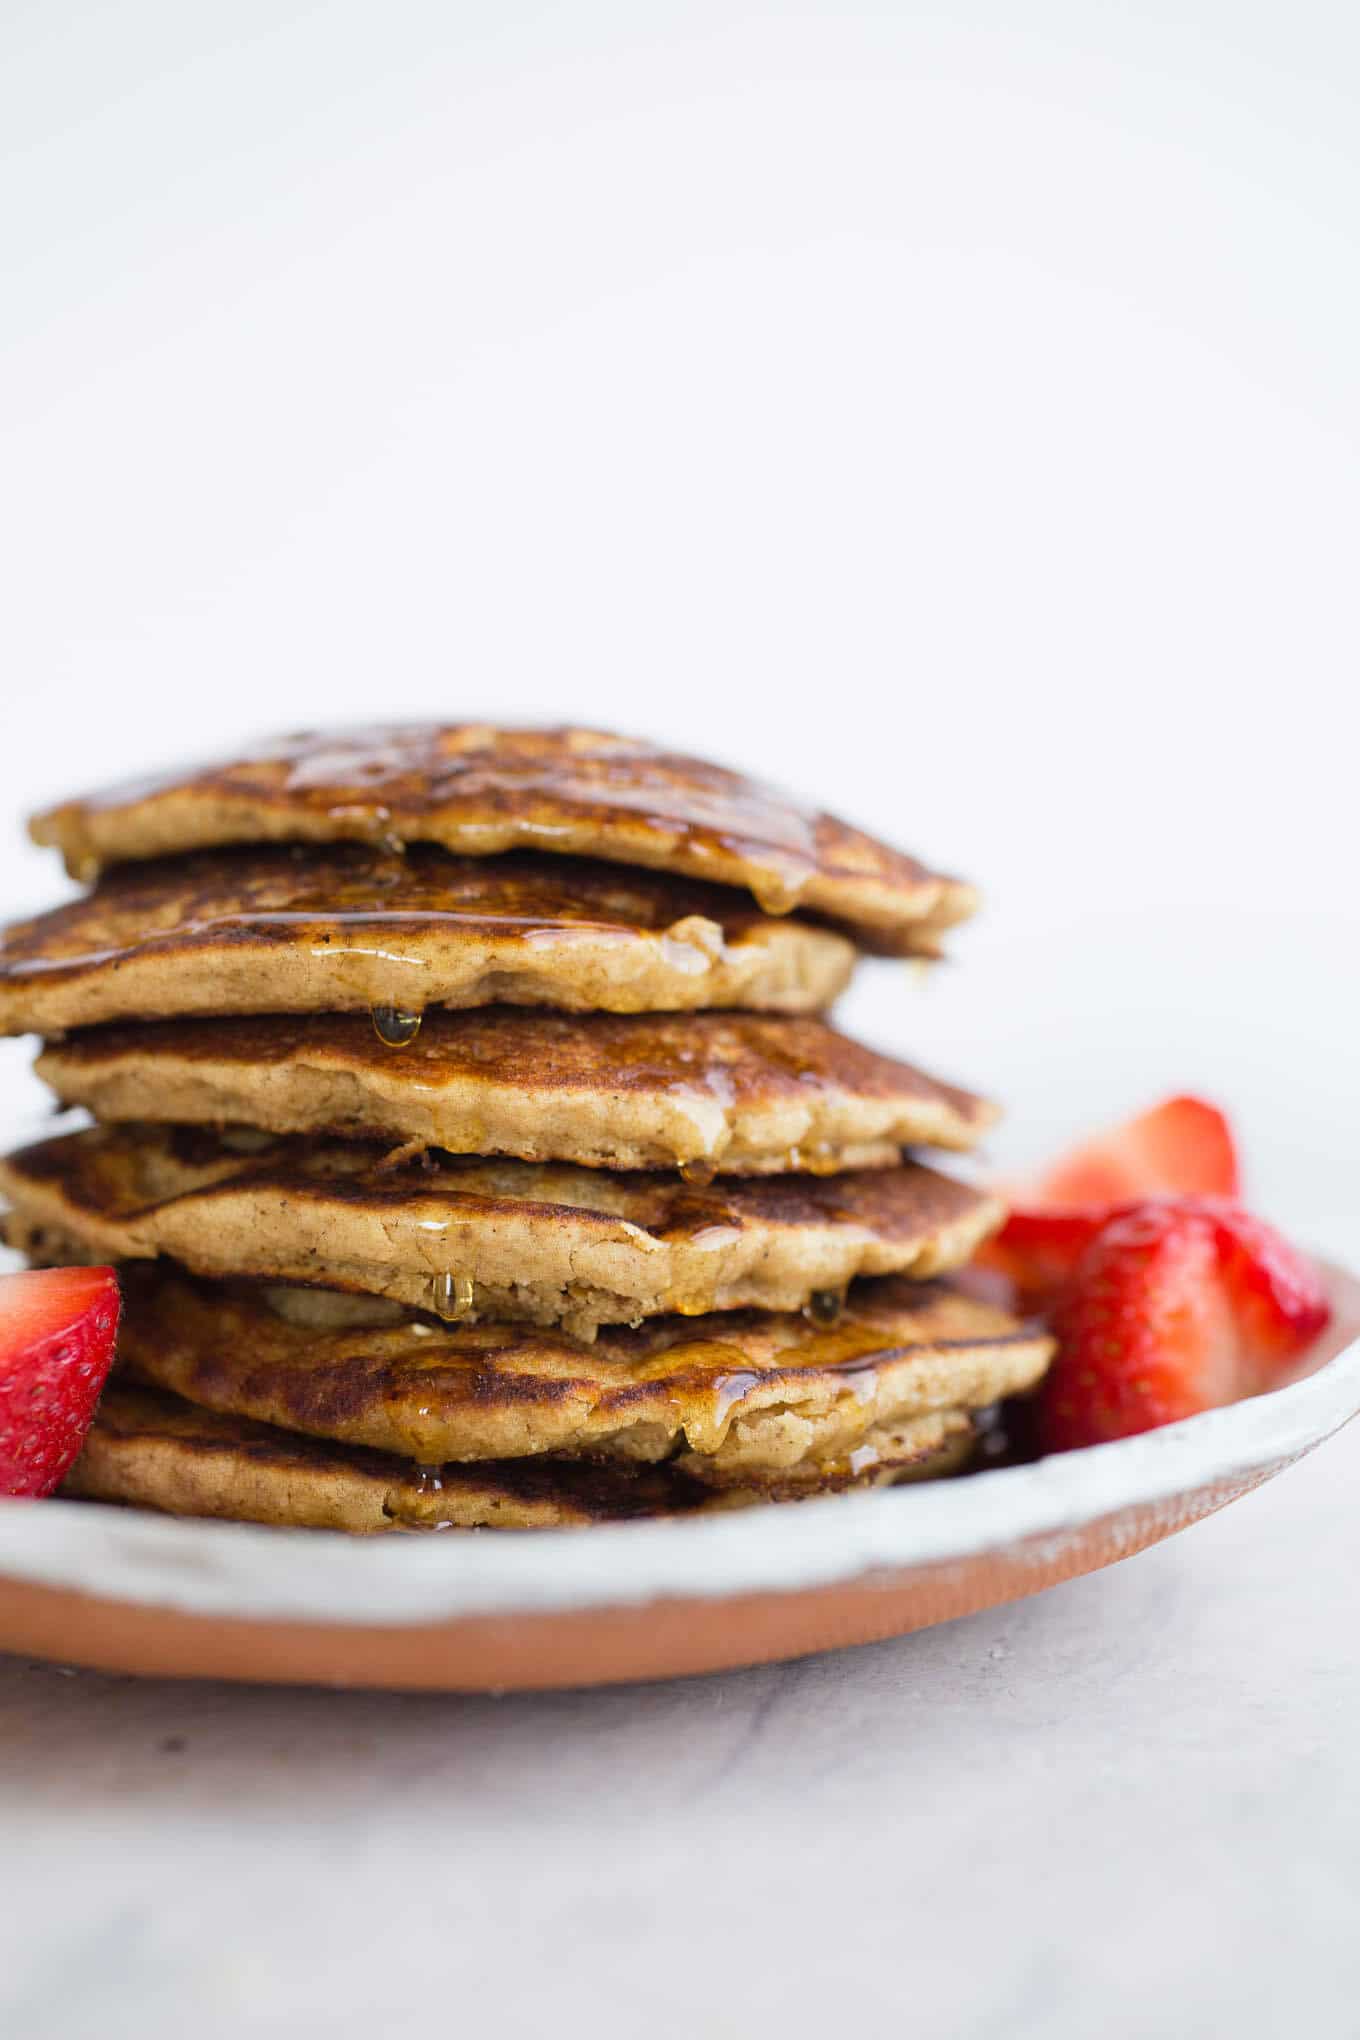 Gluten-free Vegan Oat Flour Pancakes made with whole grain gluten-free oats, white rice flour, applesauce, and non-dairy buttermilk, for a light and tender crumb. An oat flour pancake recipe made without eggs or bananas. Easy and delicious!